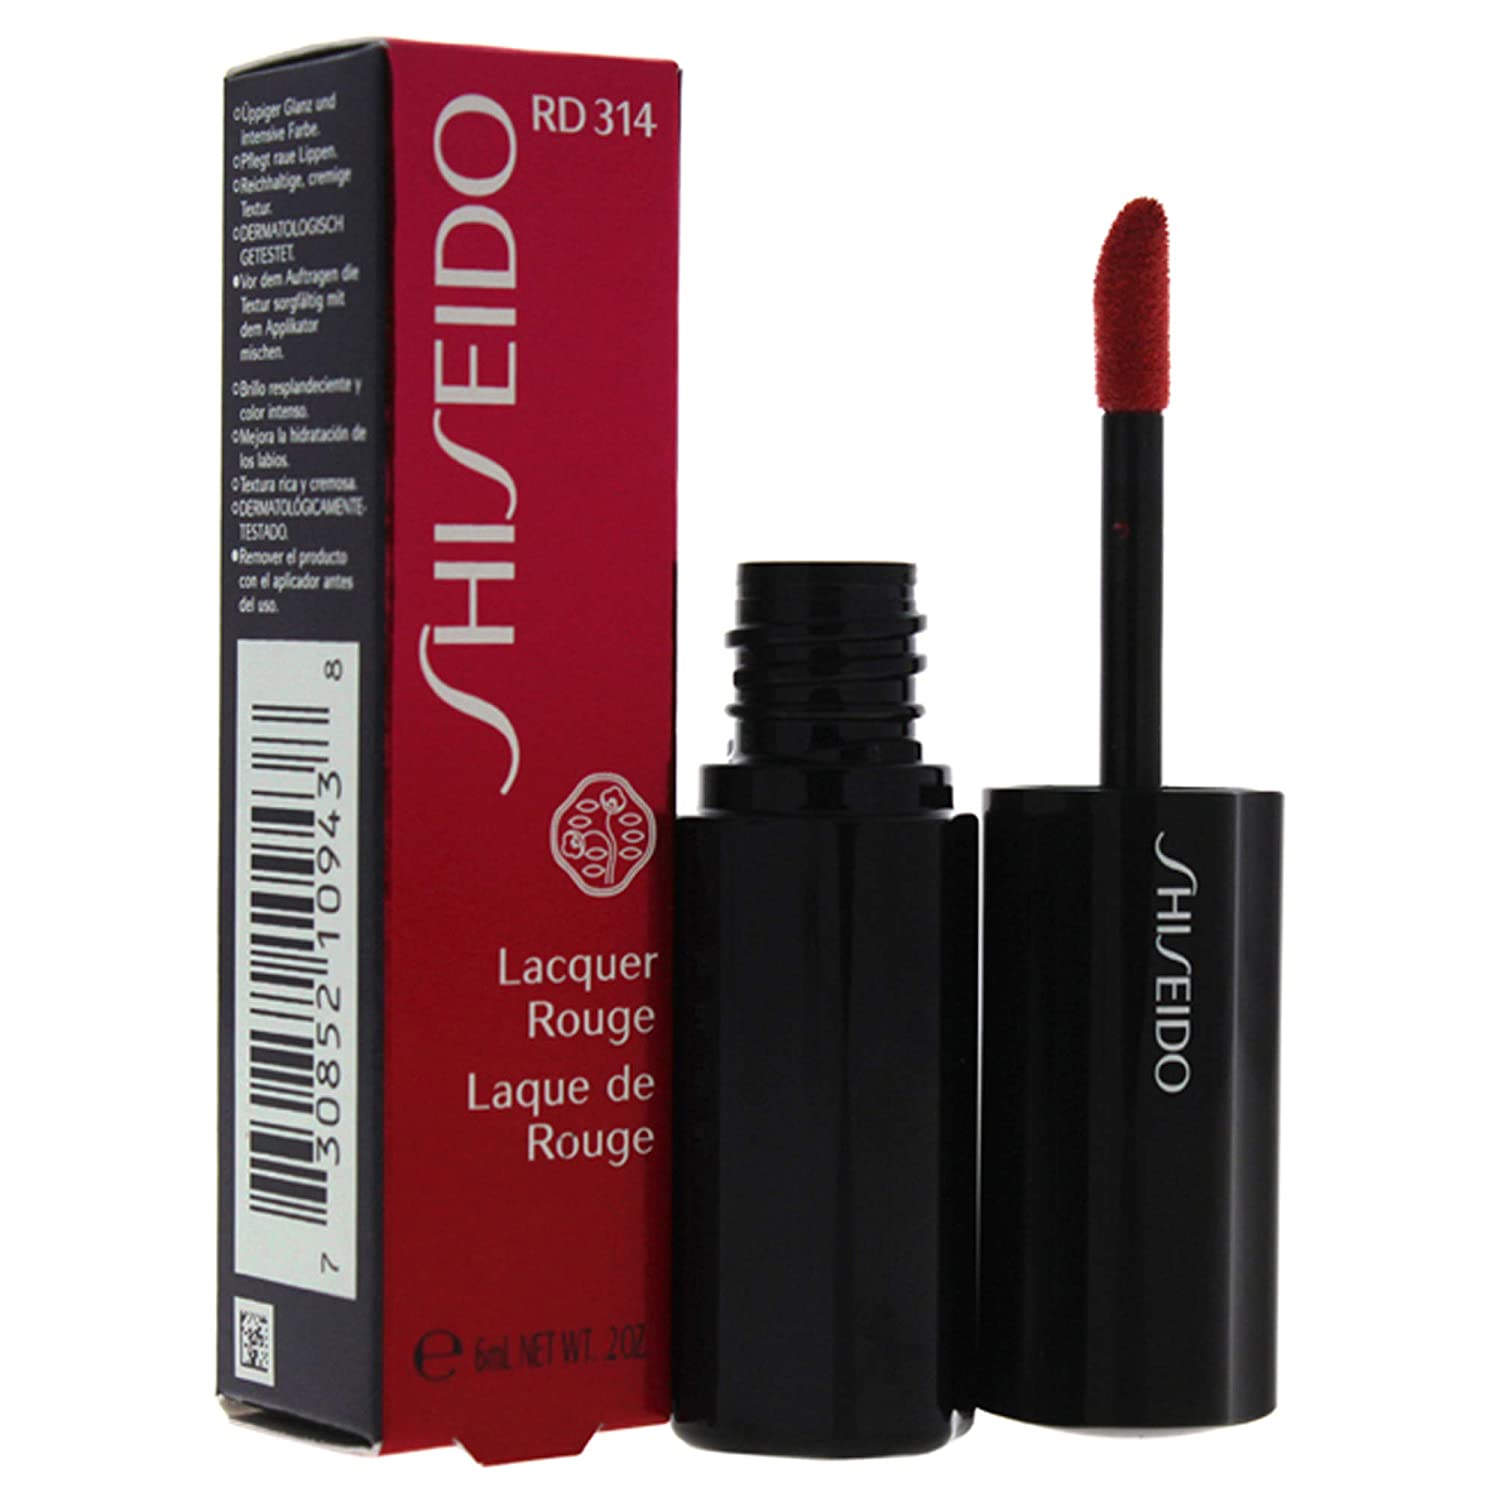 Shiseido Smk Lacquer Rouge Rd314 Pack of 1, ‎plum